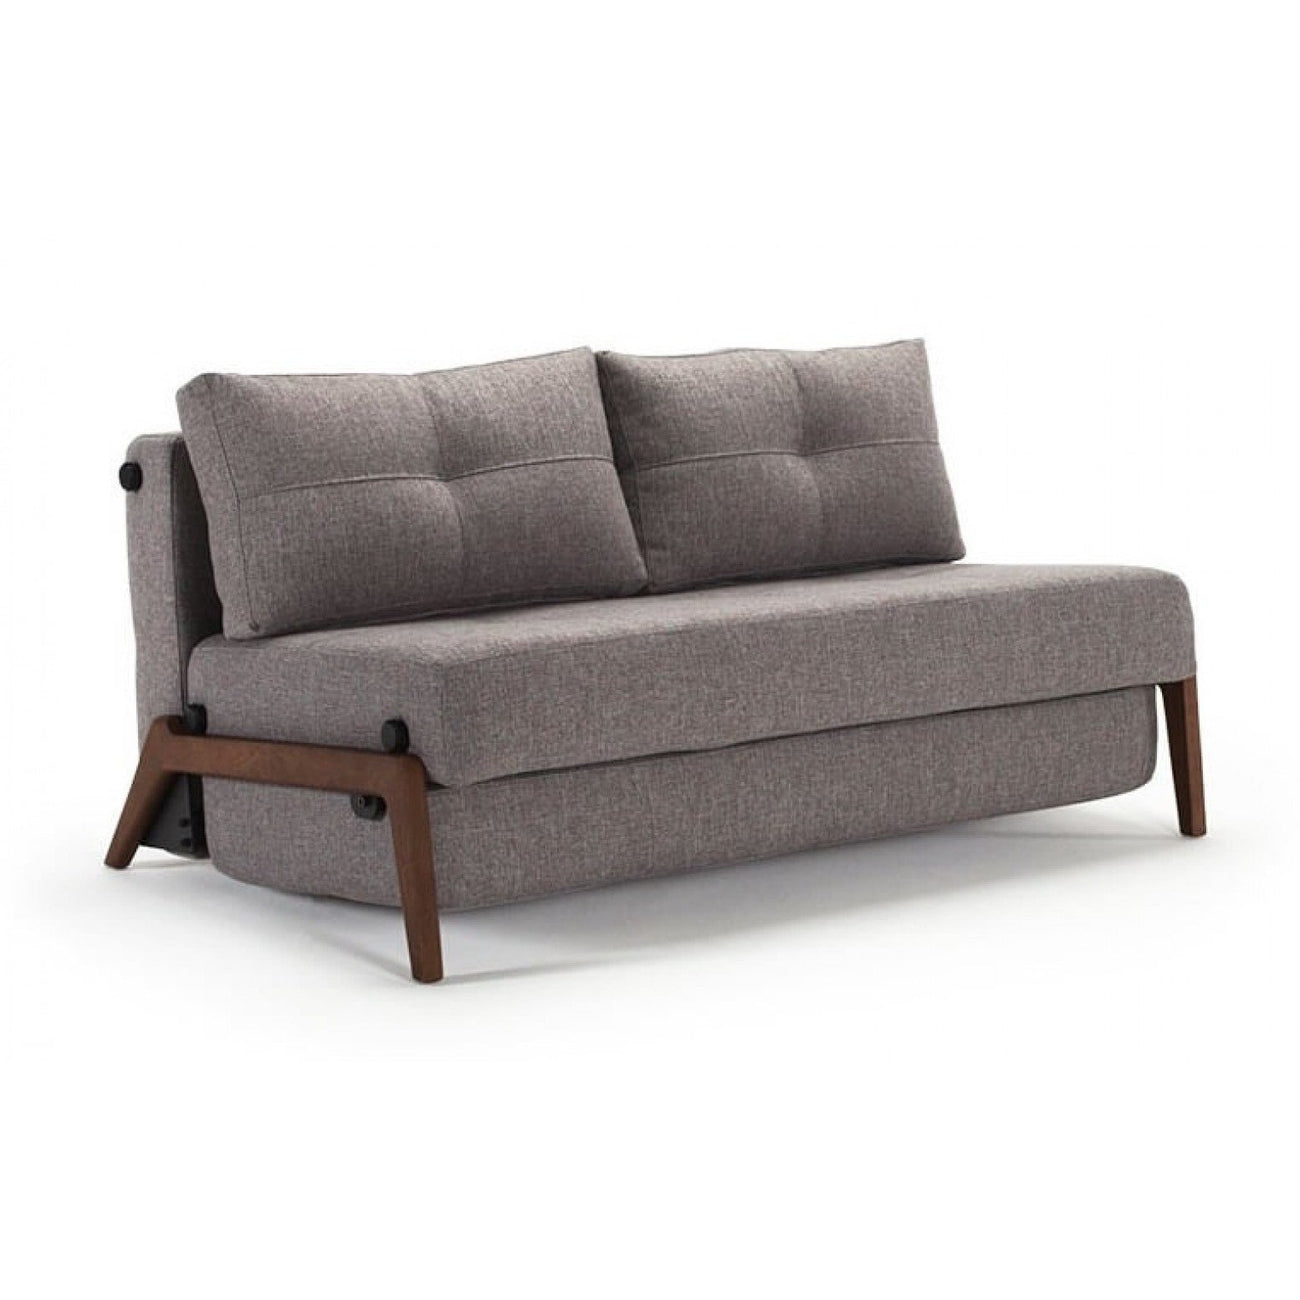 Cubed 02 deluxe sofa DARK WOOD (FULL)-Innovation Living-INNO-94-744002521-3-SofasMixed Dance Grey-1-France and Son